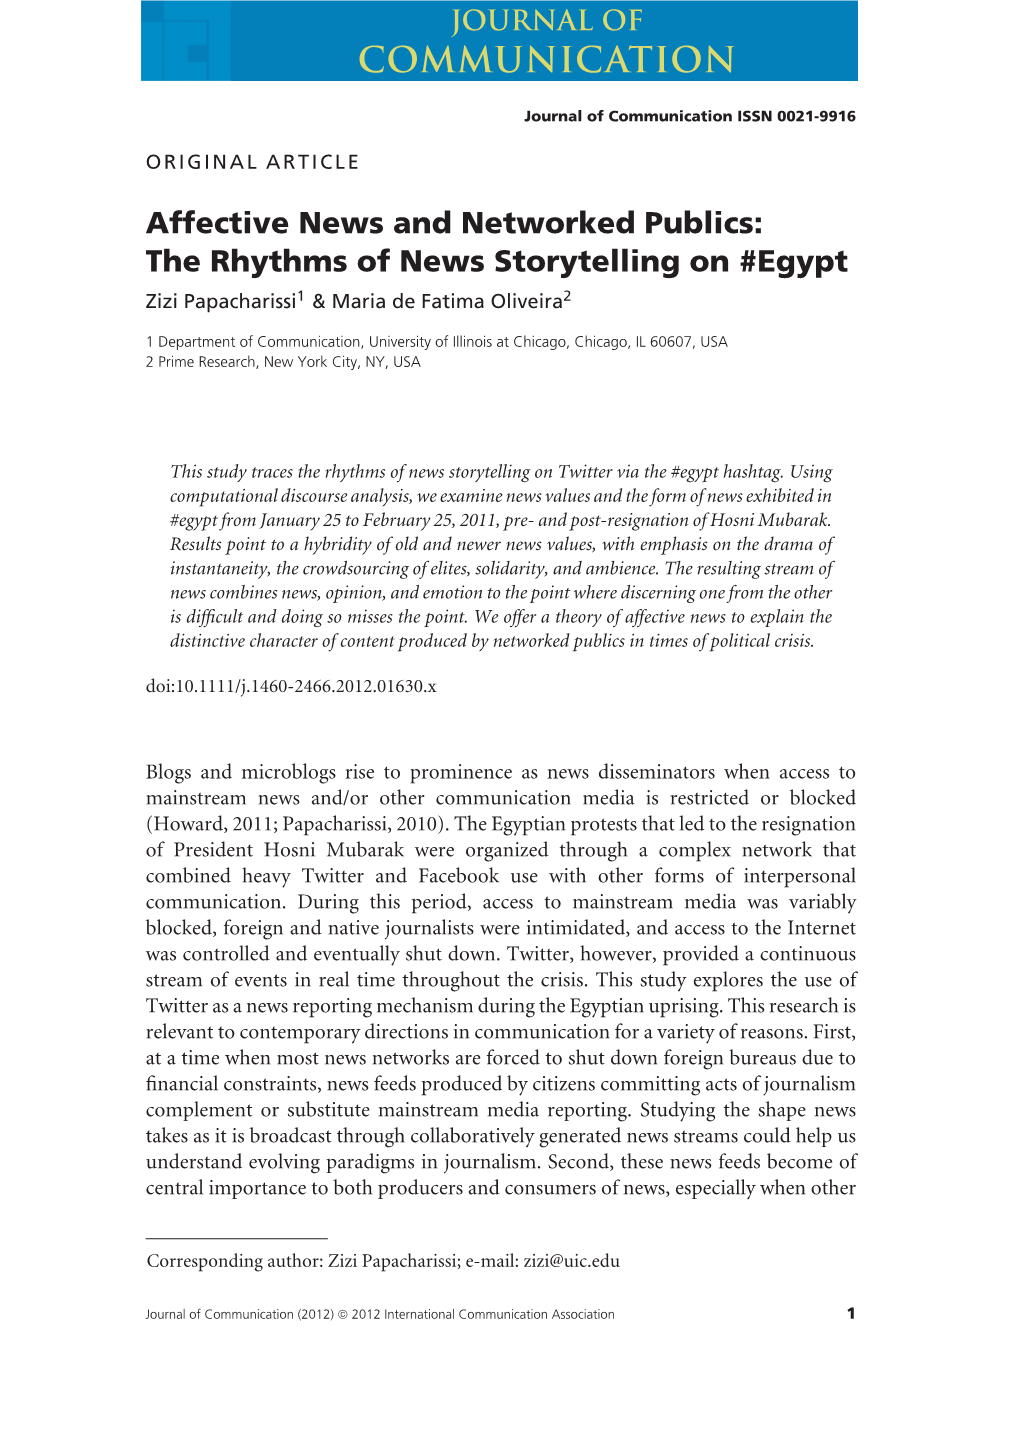 Affective News and Networked Publics: the Rhythms of News Storytelling on #Egypt Zizi Papacharissi1 & Maria De Fatima Oliveira2